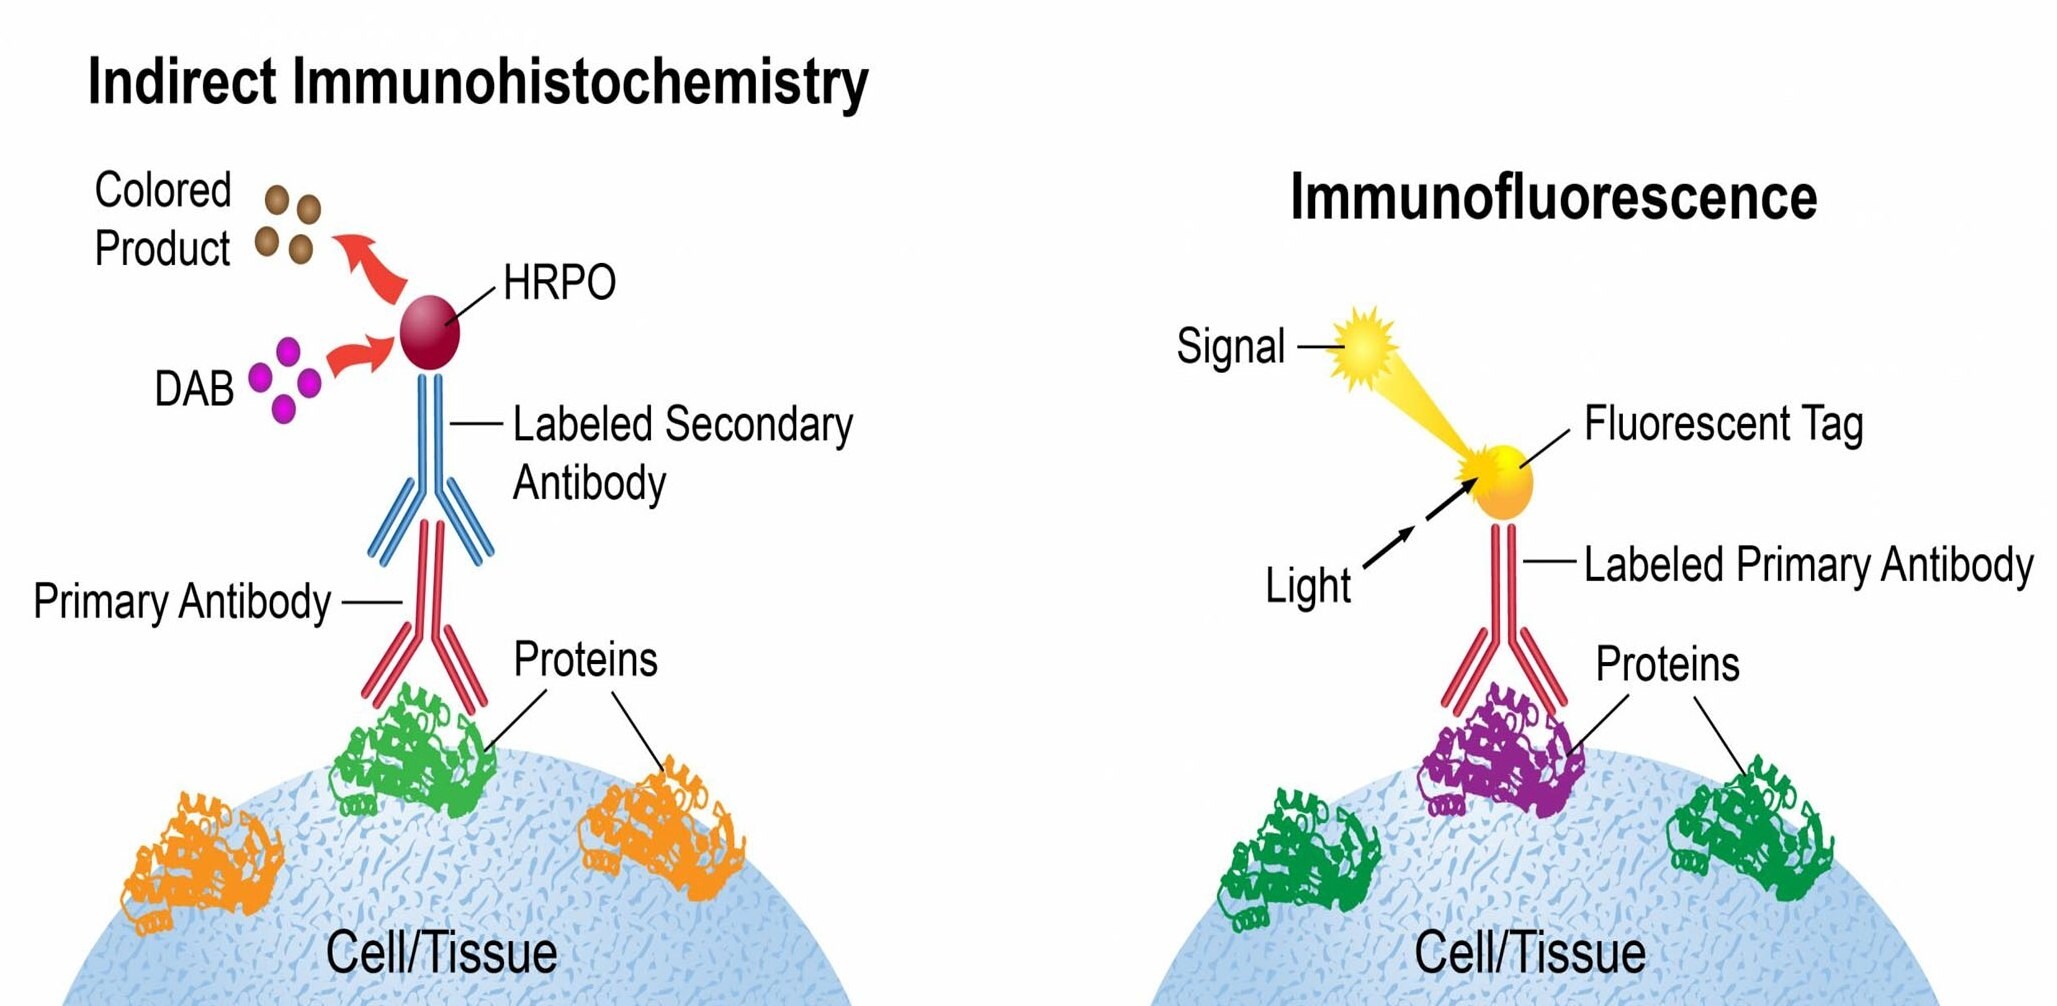 Indirect immunohistochemistry (IHC) and immunofluorescence (IF) detection methods for cells and tissue samples